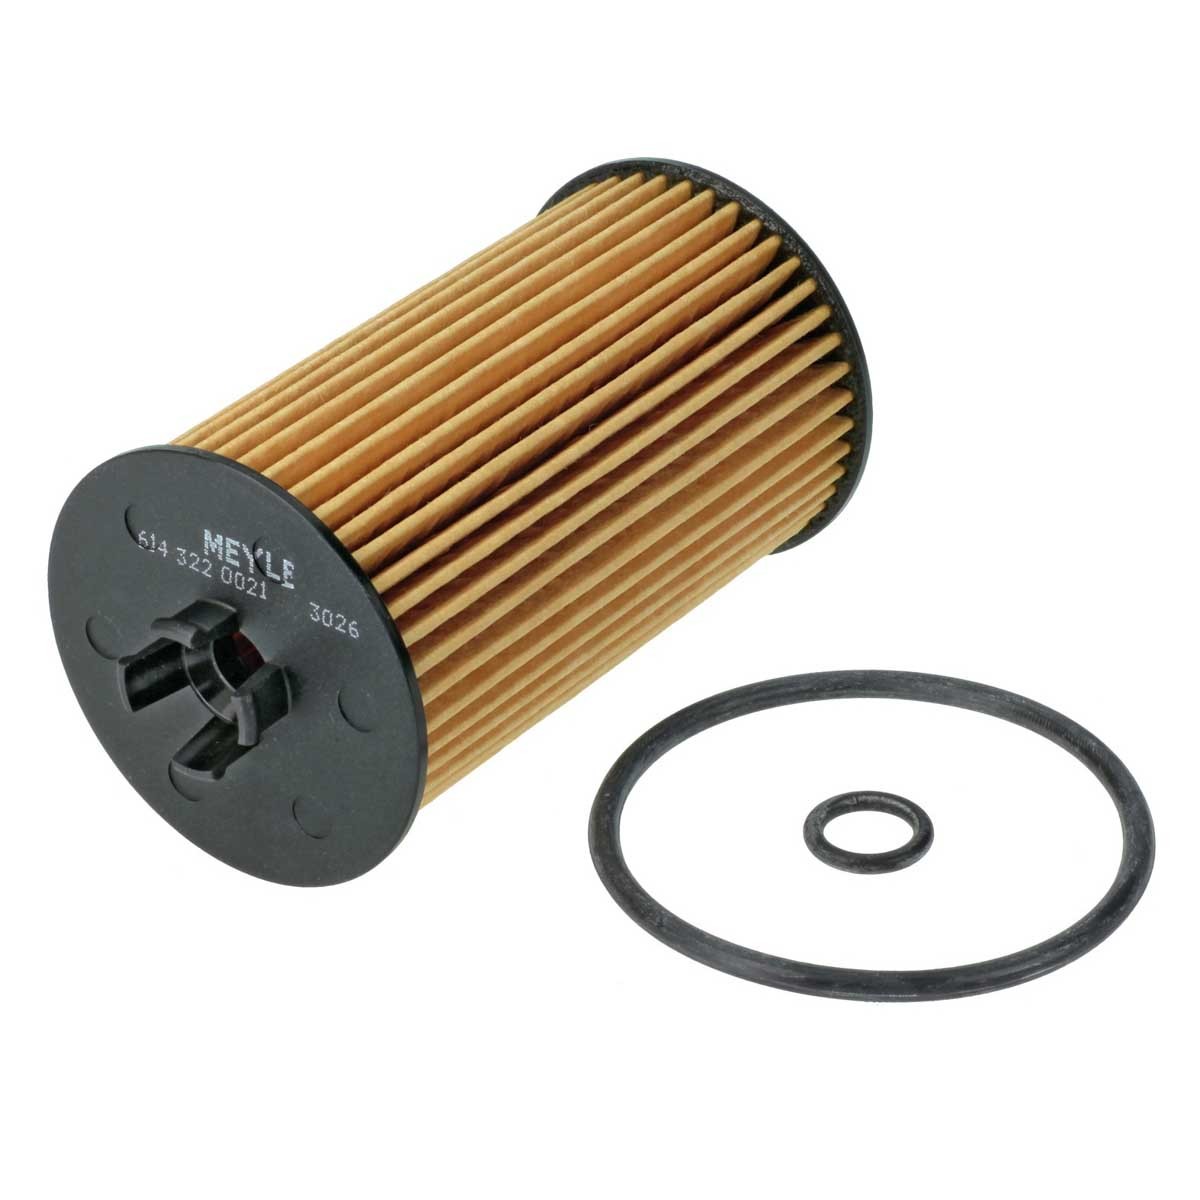 MEYLE 614 322 0021 Oil filter ORIGINAL Quality, with seal, Filter Insert